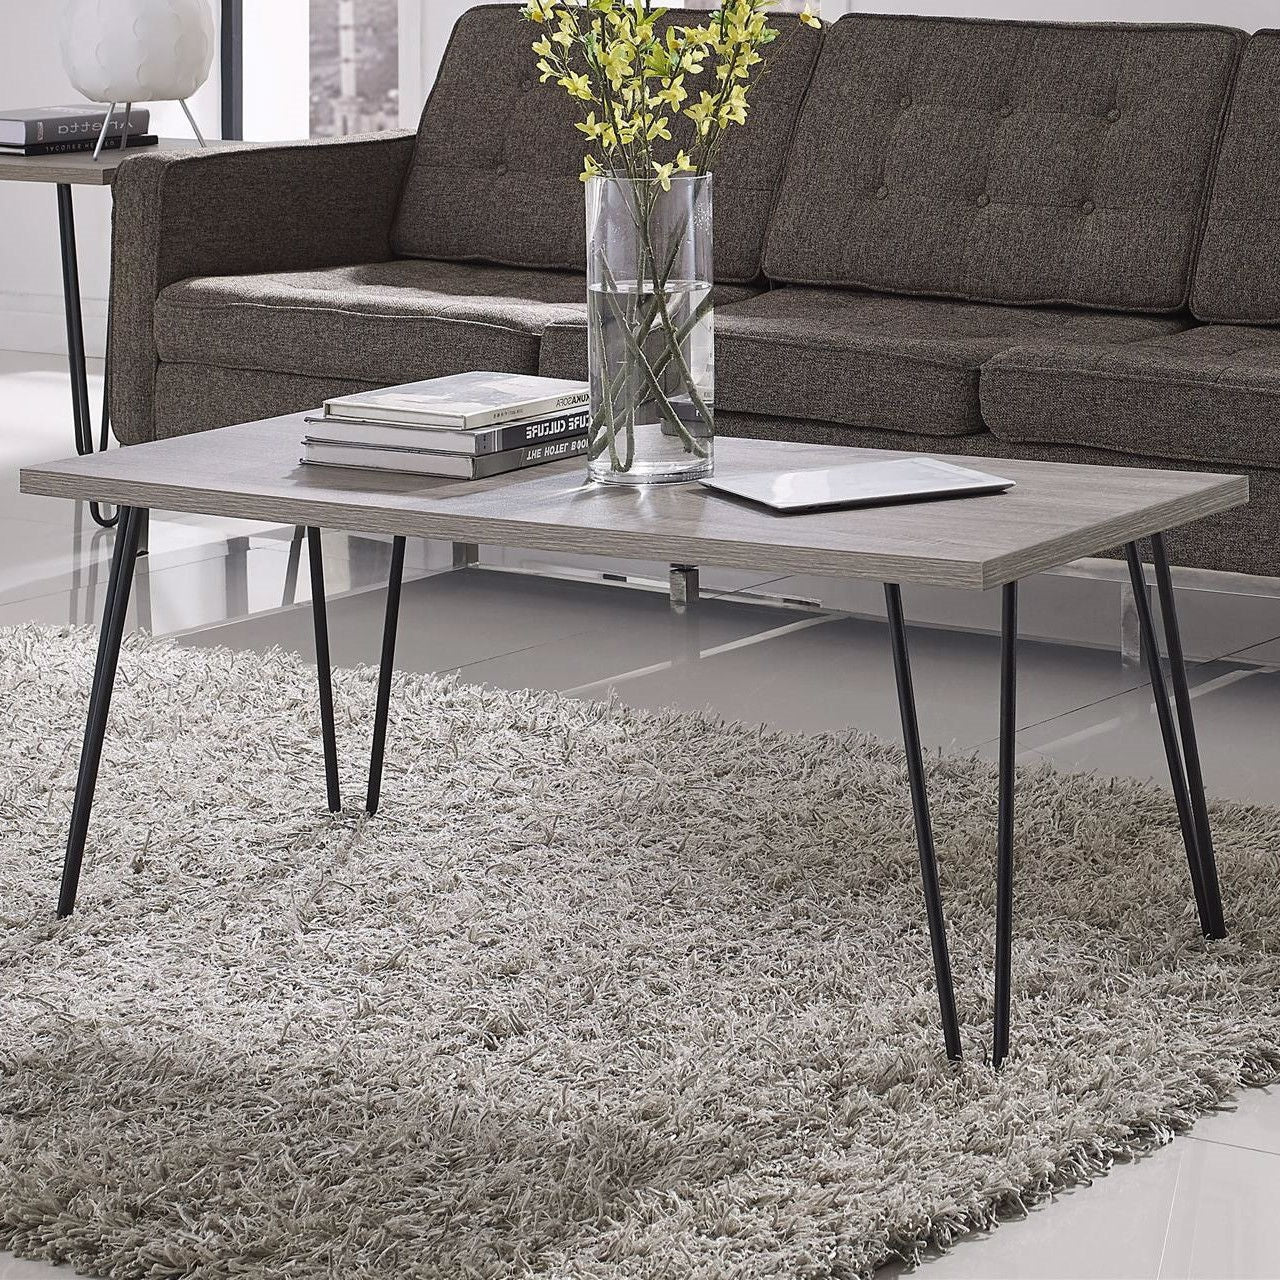 Living Room > Coffee Tables - Modern Classic Vintage Style Coffee Table With Wood Top And Metal Legs